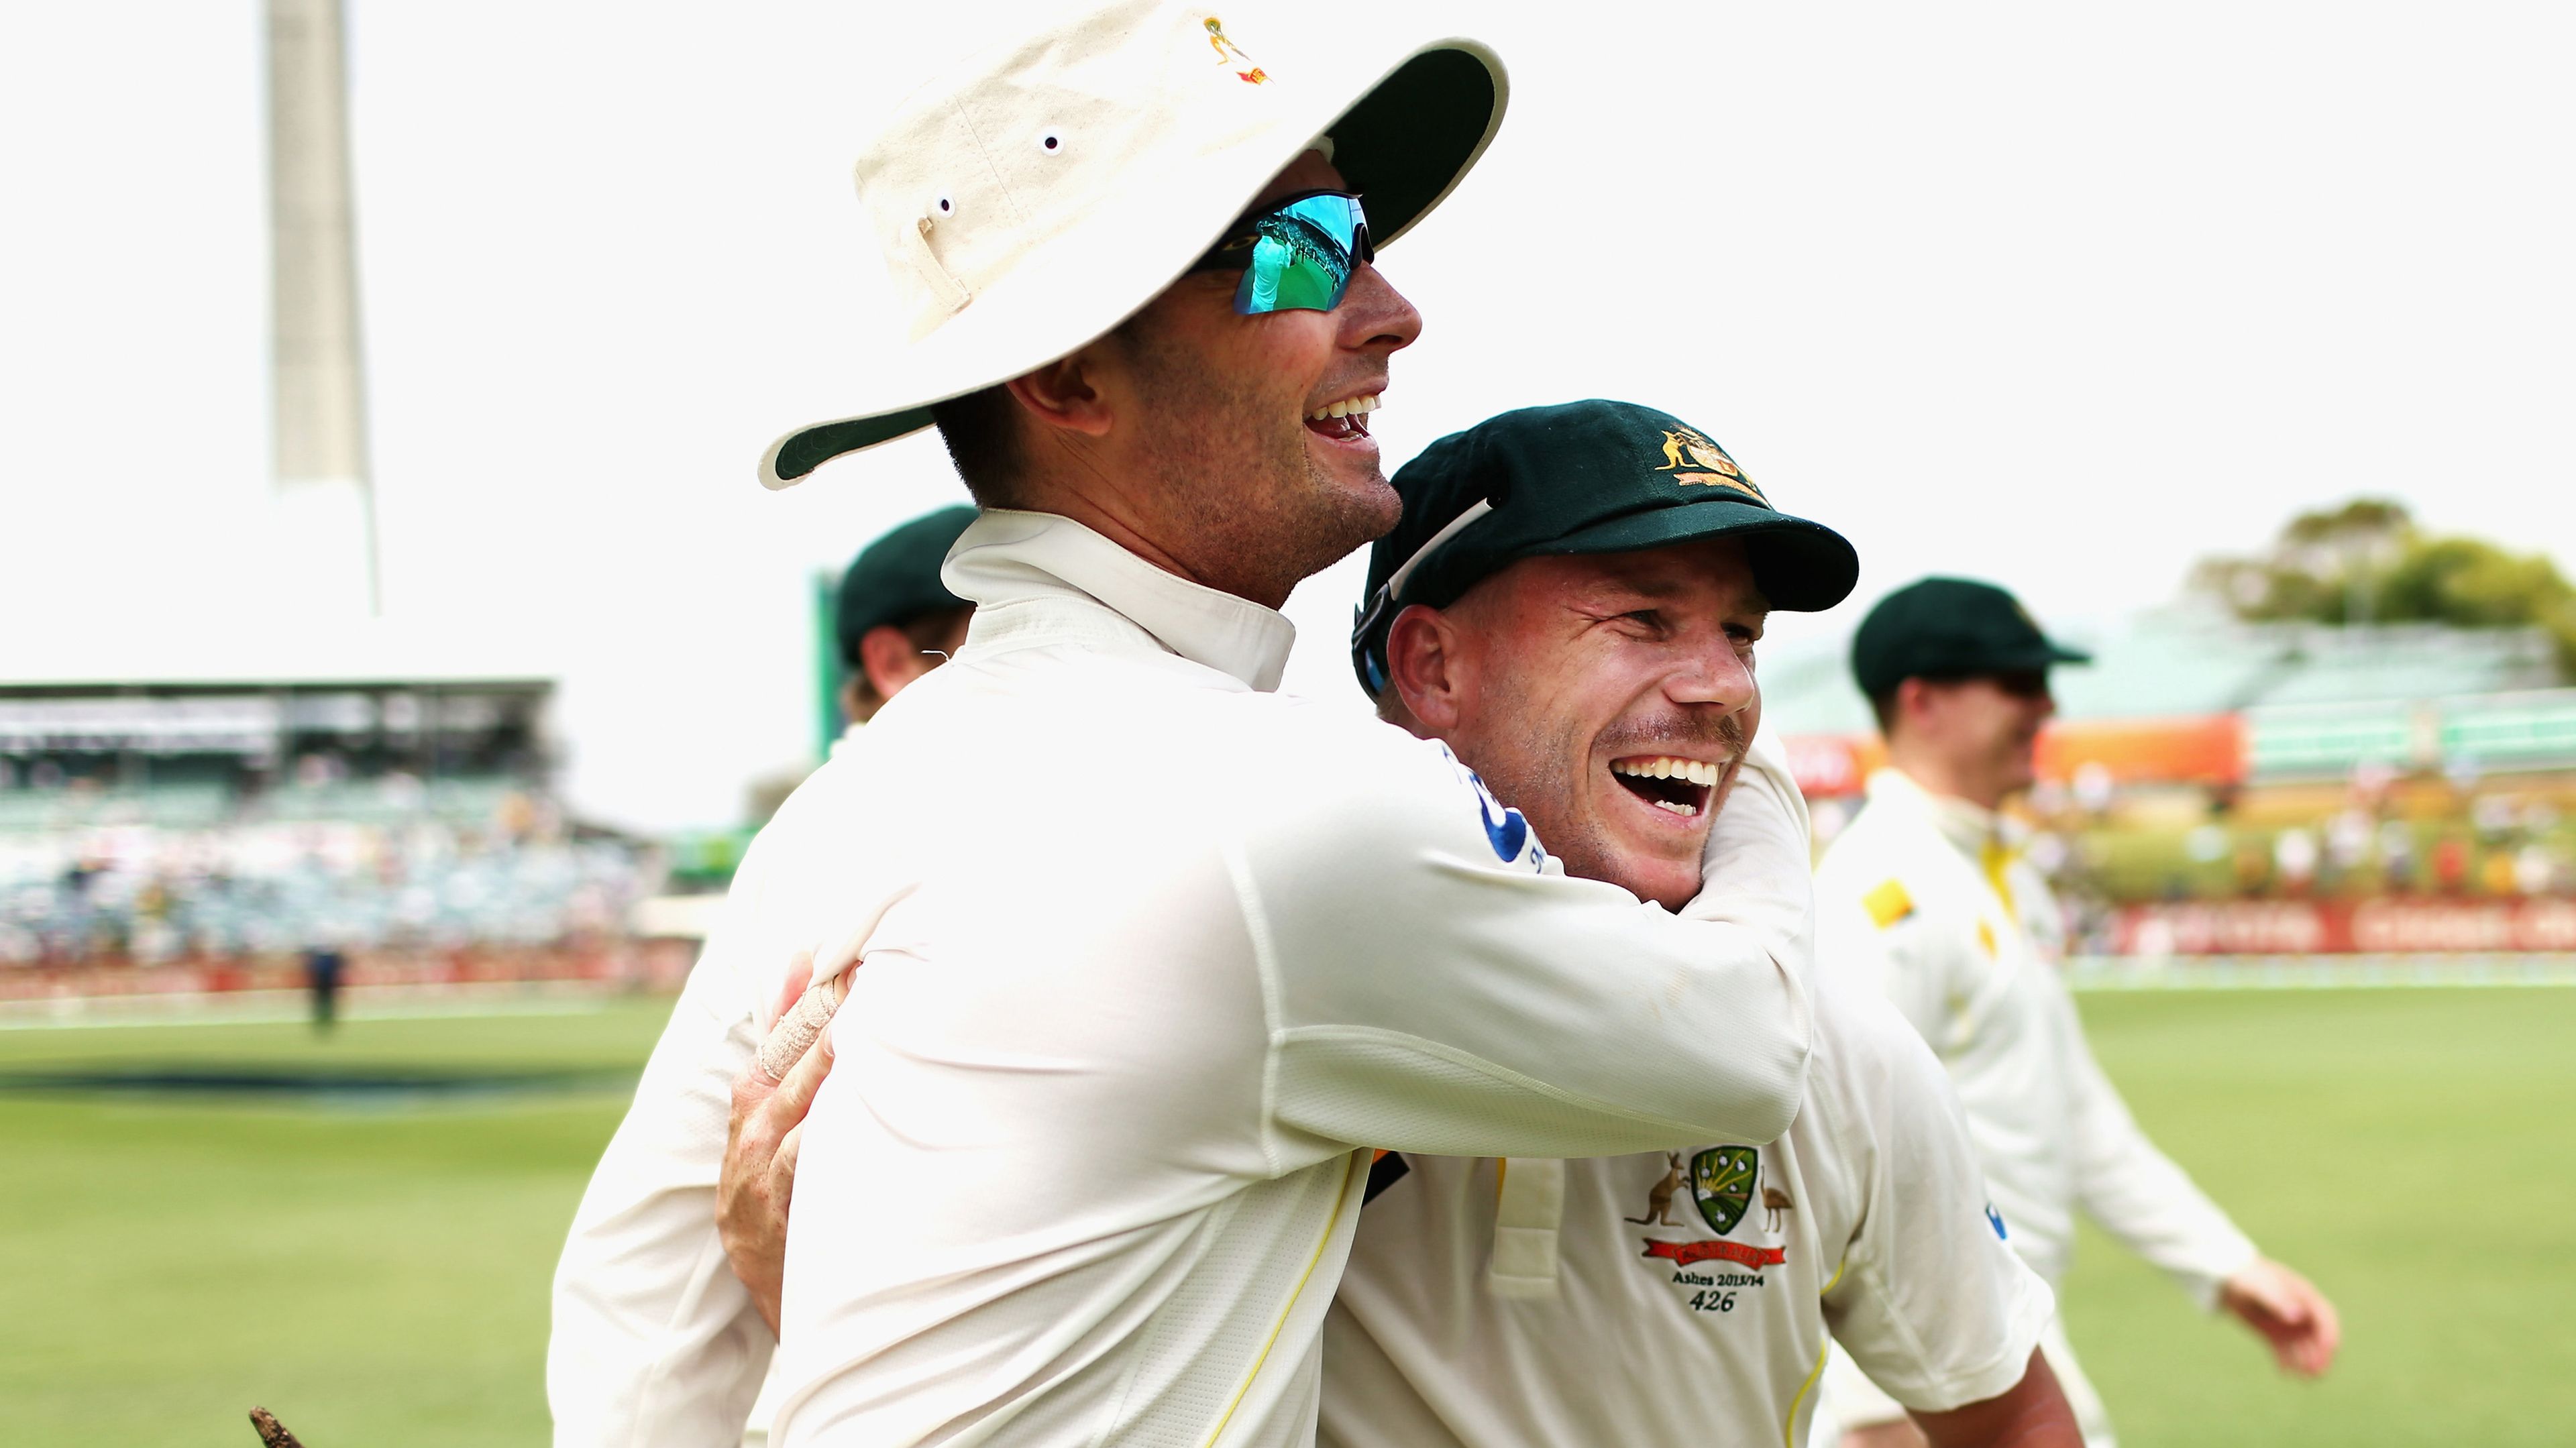 Michael Clarke and David Warner of Australia celebrate victory during day five of the Third Ashes Test Match between Australia and England at WACA on December 17, 2013 in Perth, Australia. (Photo by Ryan Pierse/Getty Images)